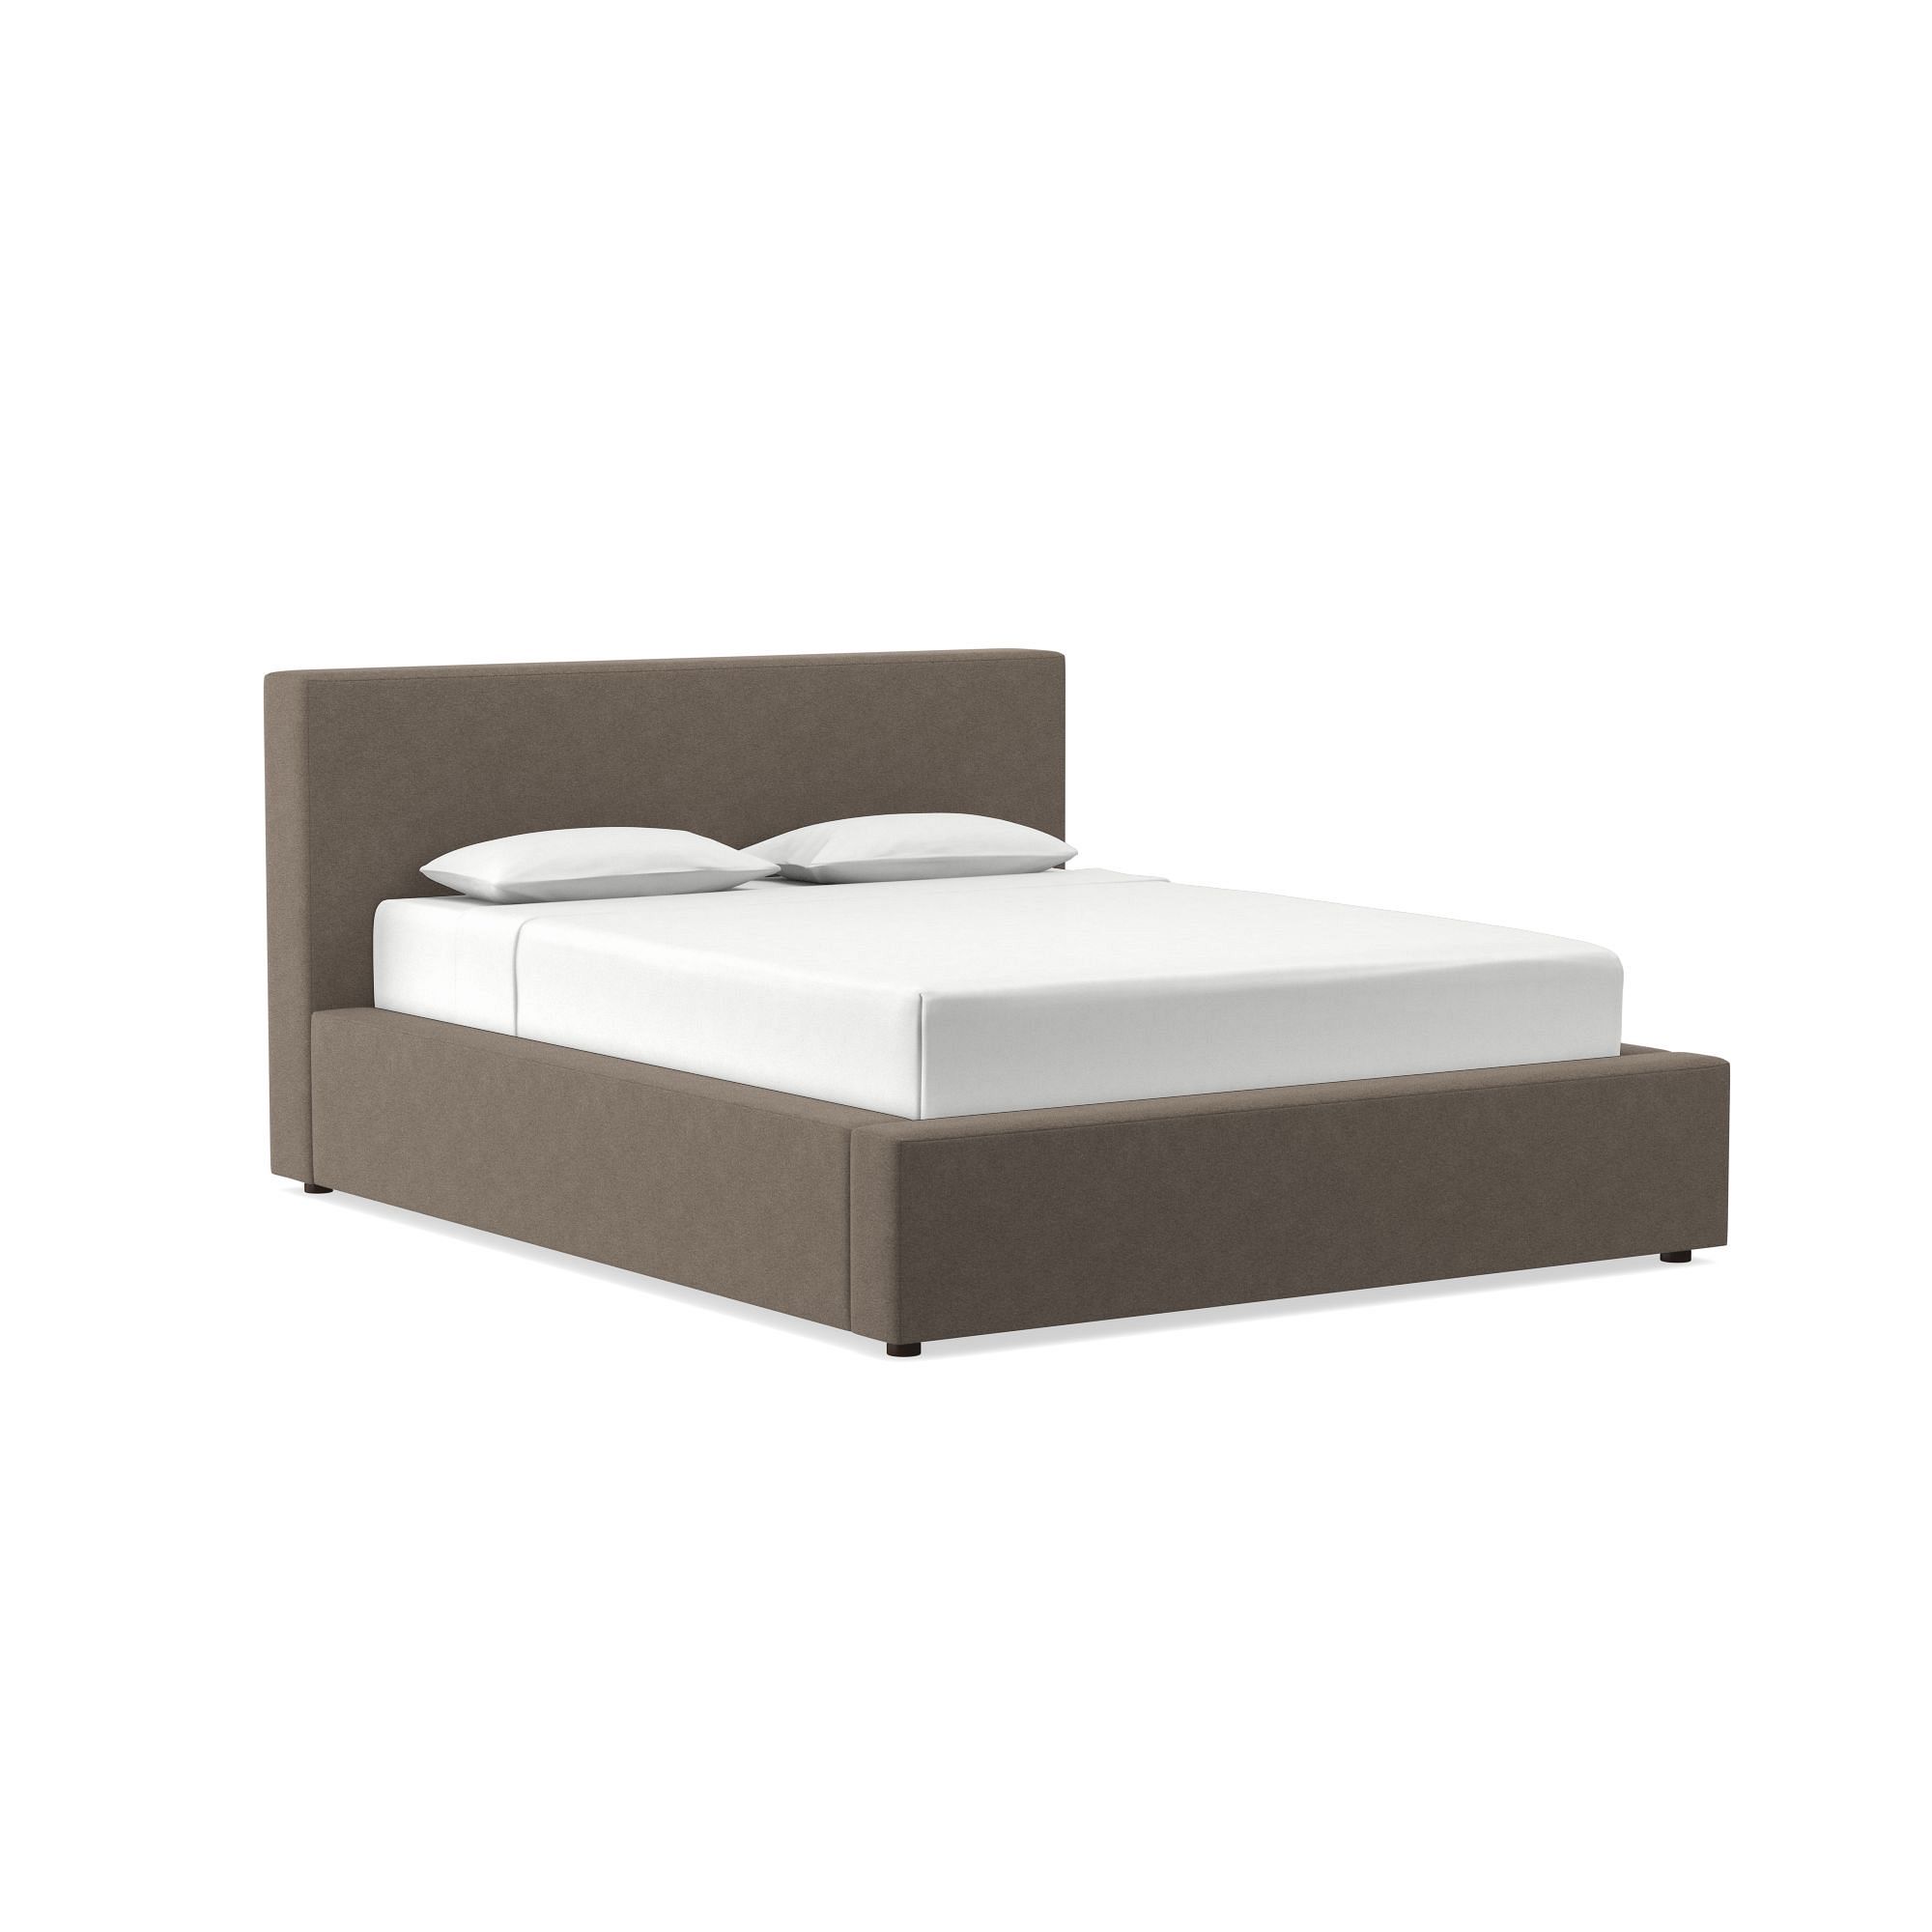 Harmony Upholstered Bed | West Elm